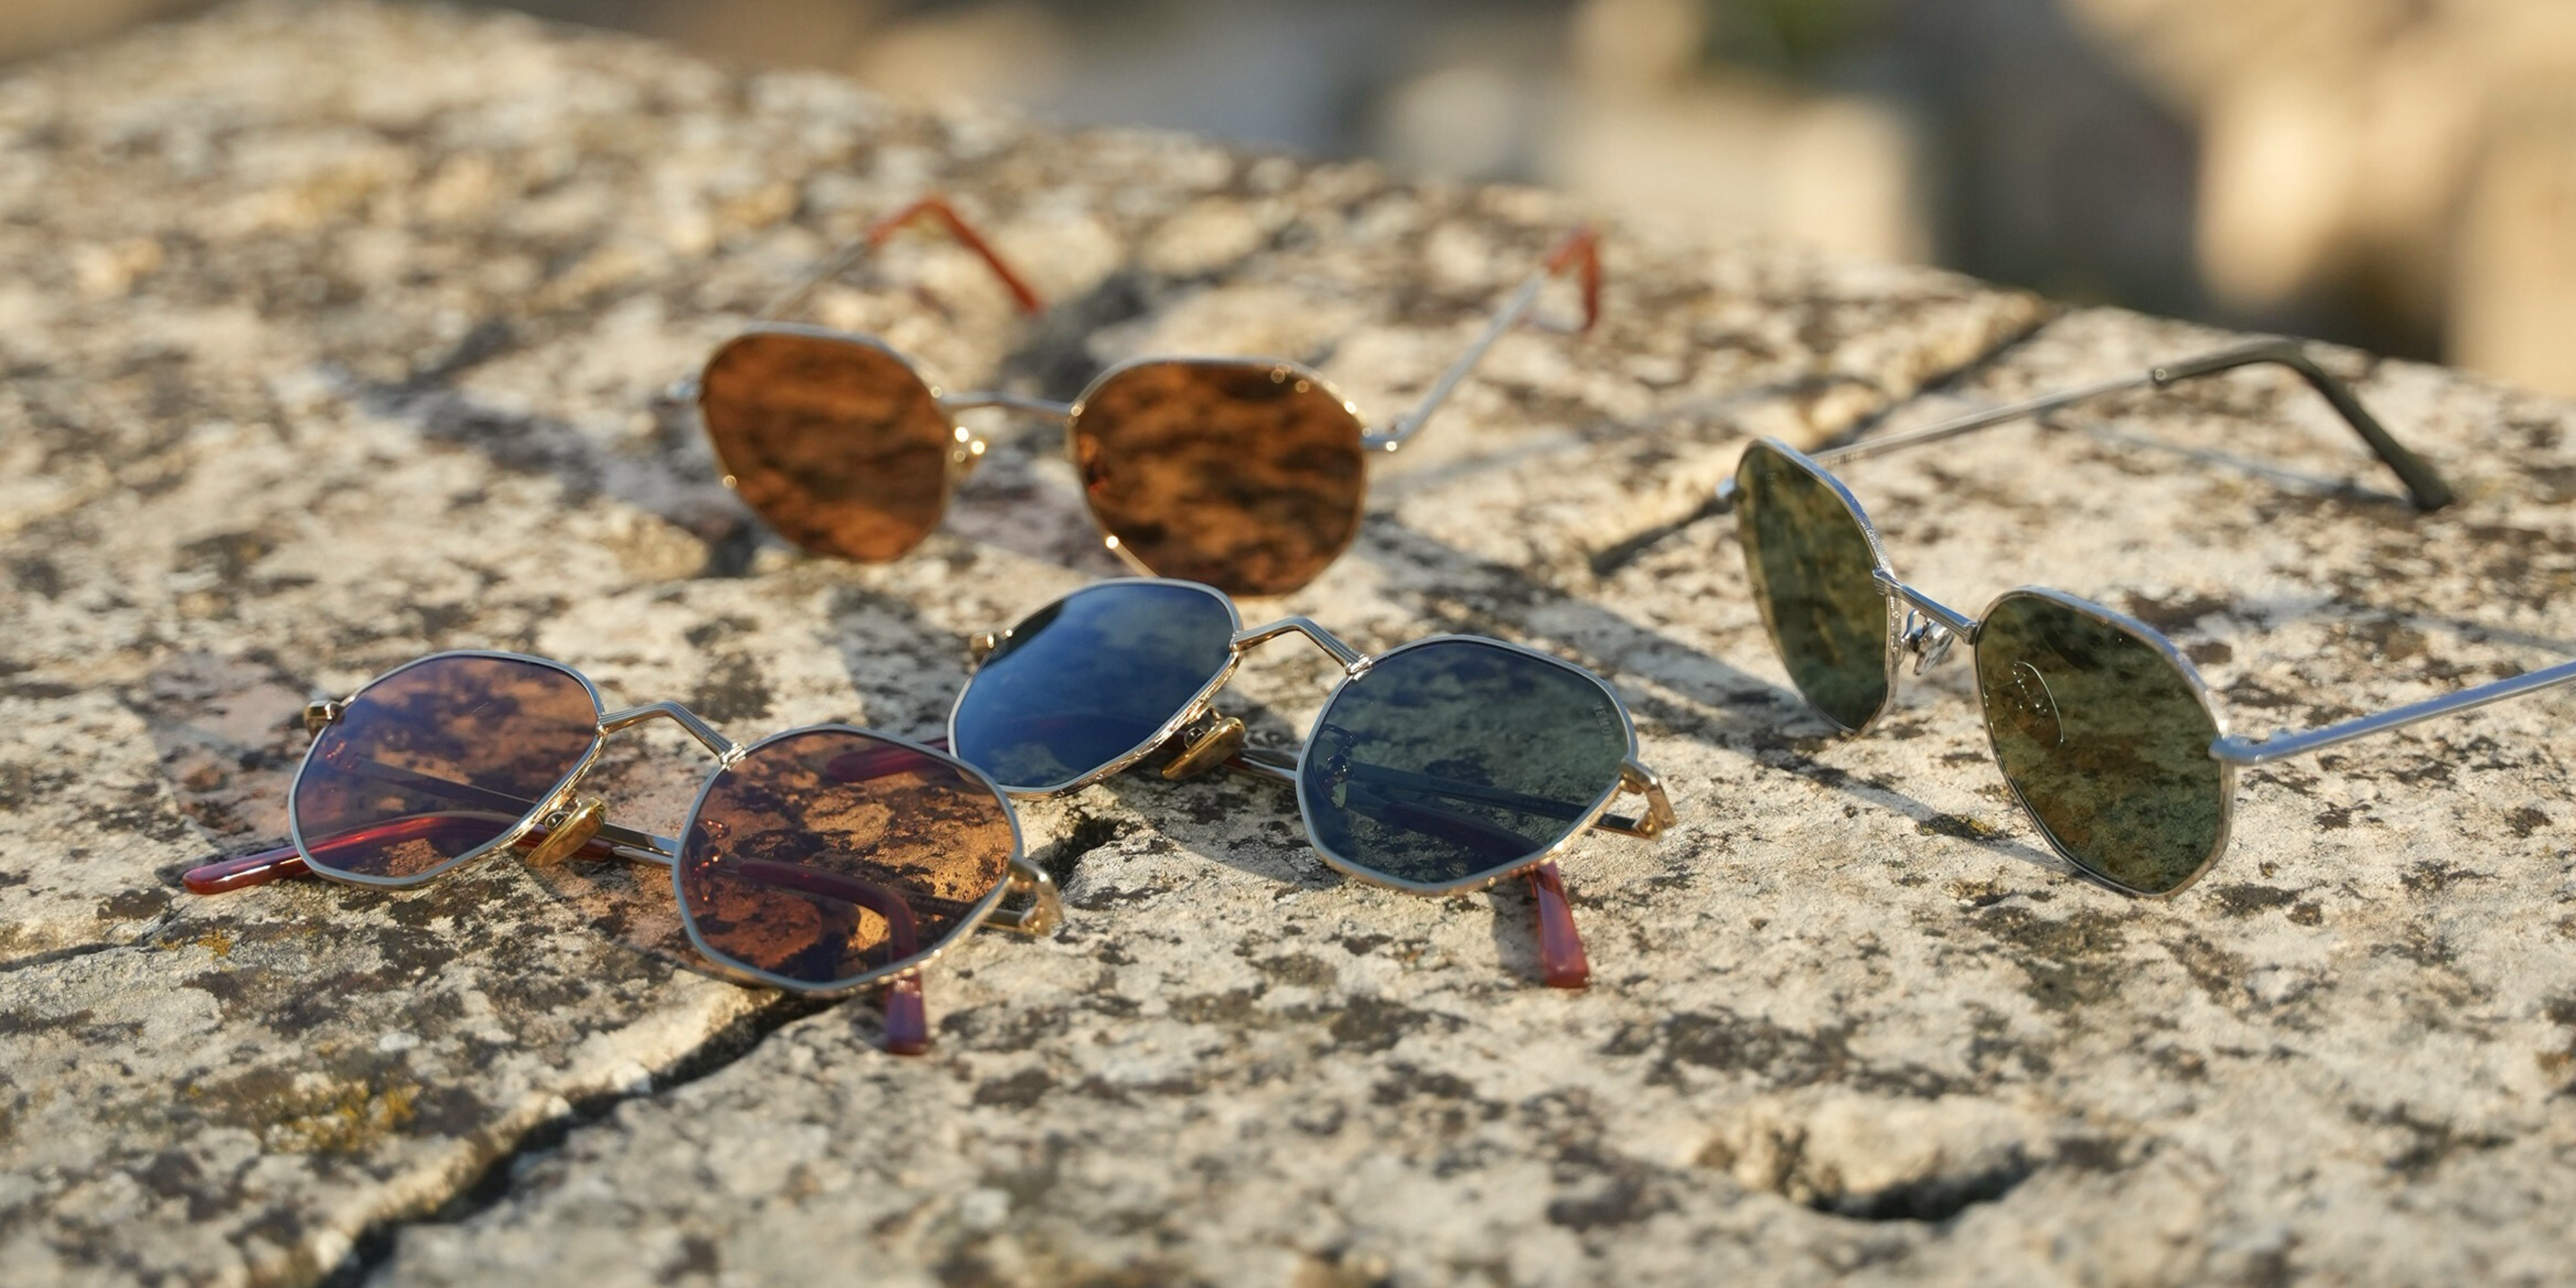 Memorí sunglass collection of metal styles handmade in Italy of top quality materials. Small size to flatter smaller faces. 